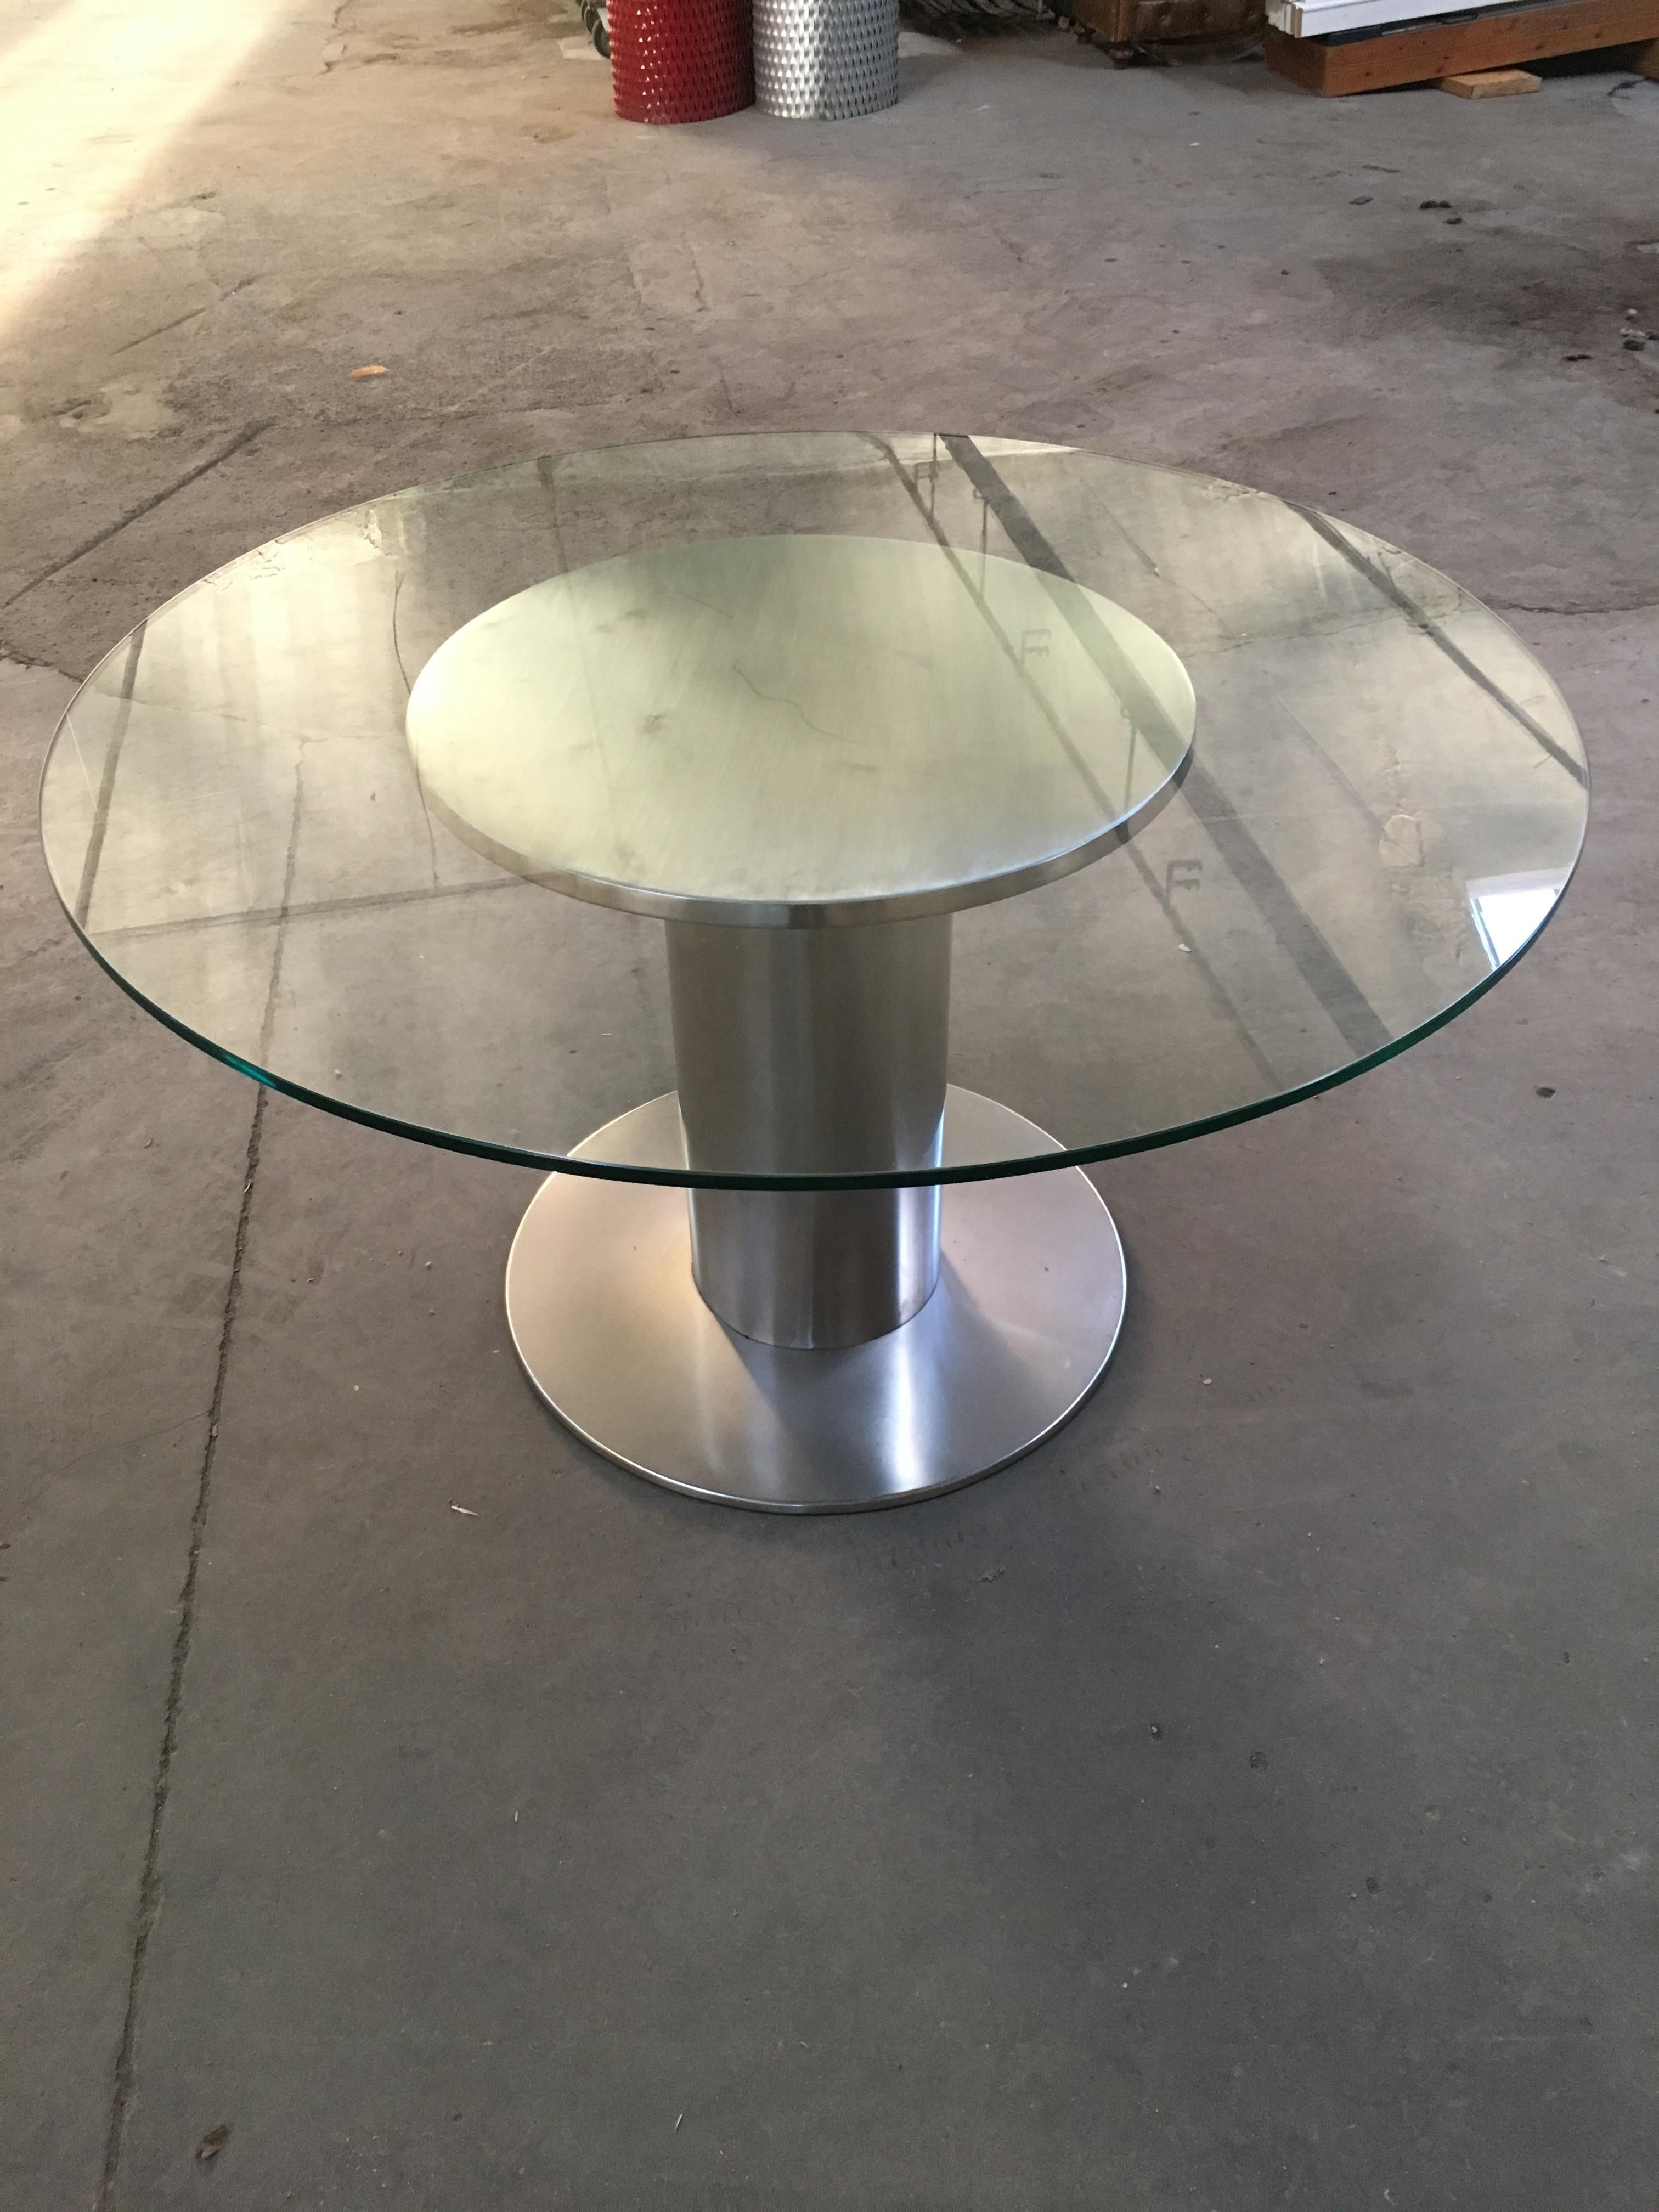 Mid-Century Modern Italian chrome dining table with glass top, 1970s.